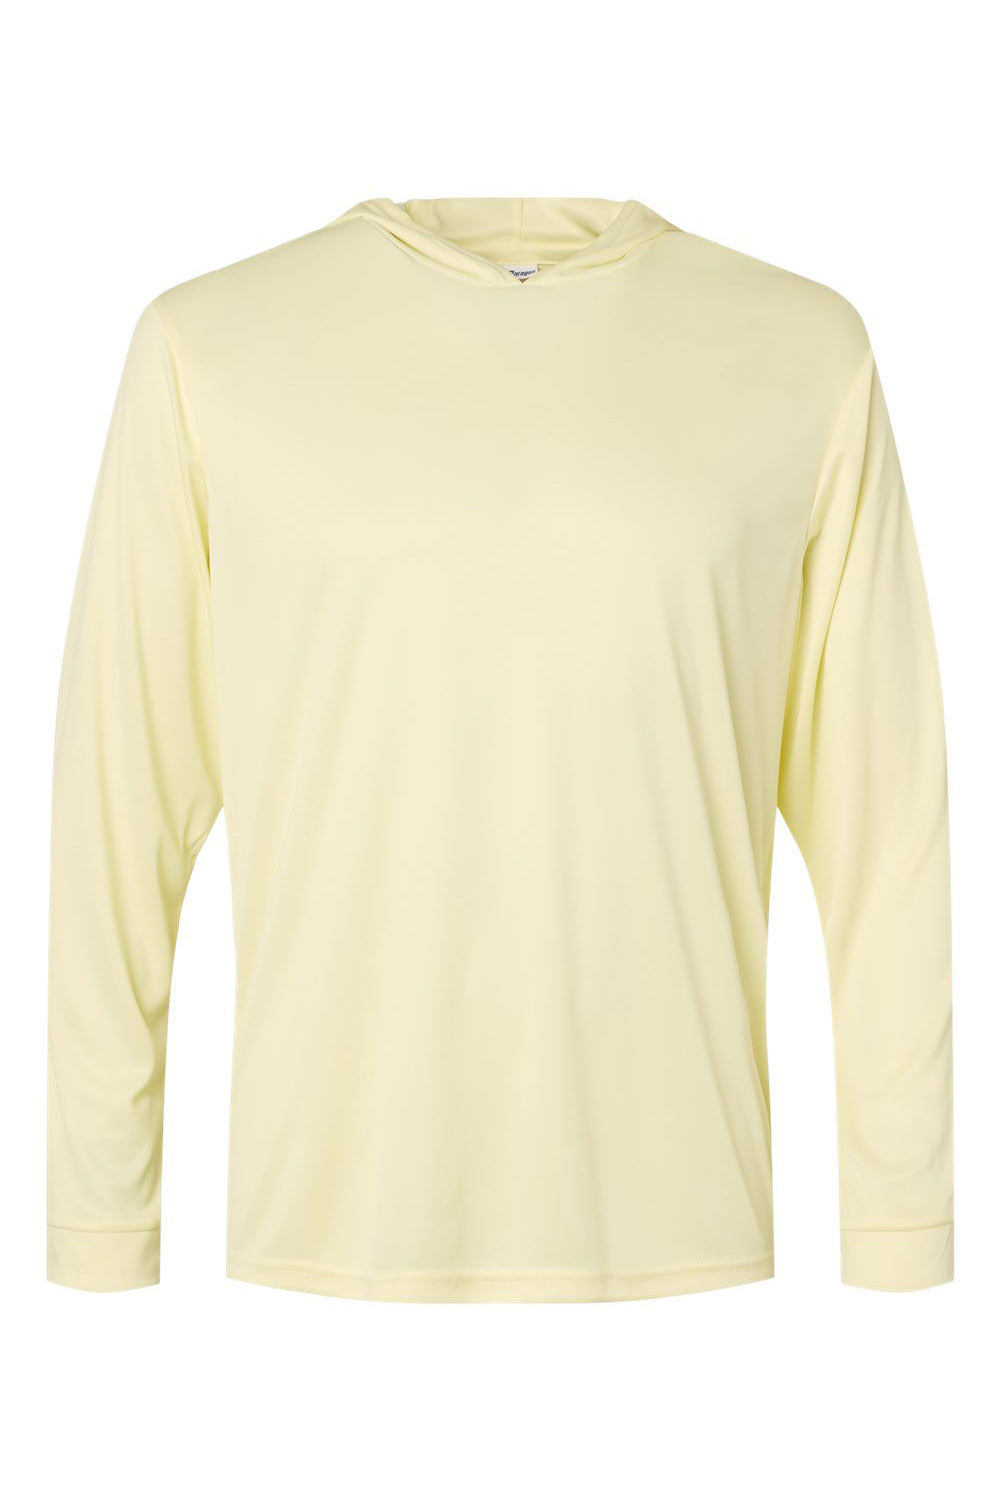 Paragon 220 Mens Bahama Performance Long Sleeve Hooded T-Shirt Hoodie Pale Yellow Flat Front